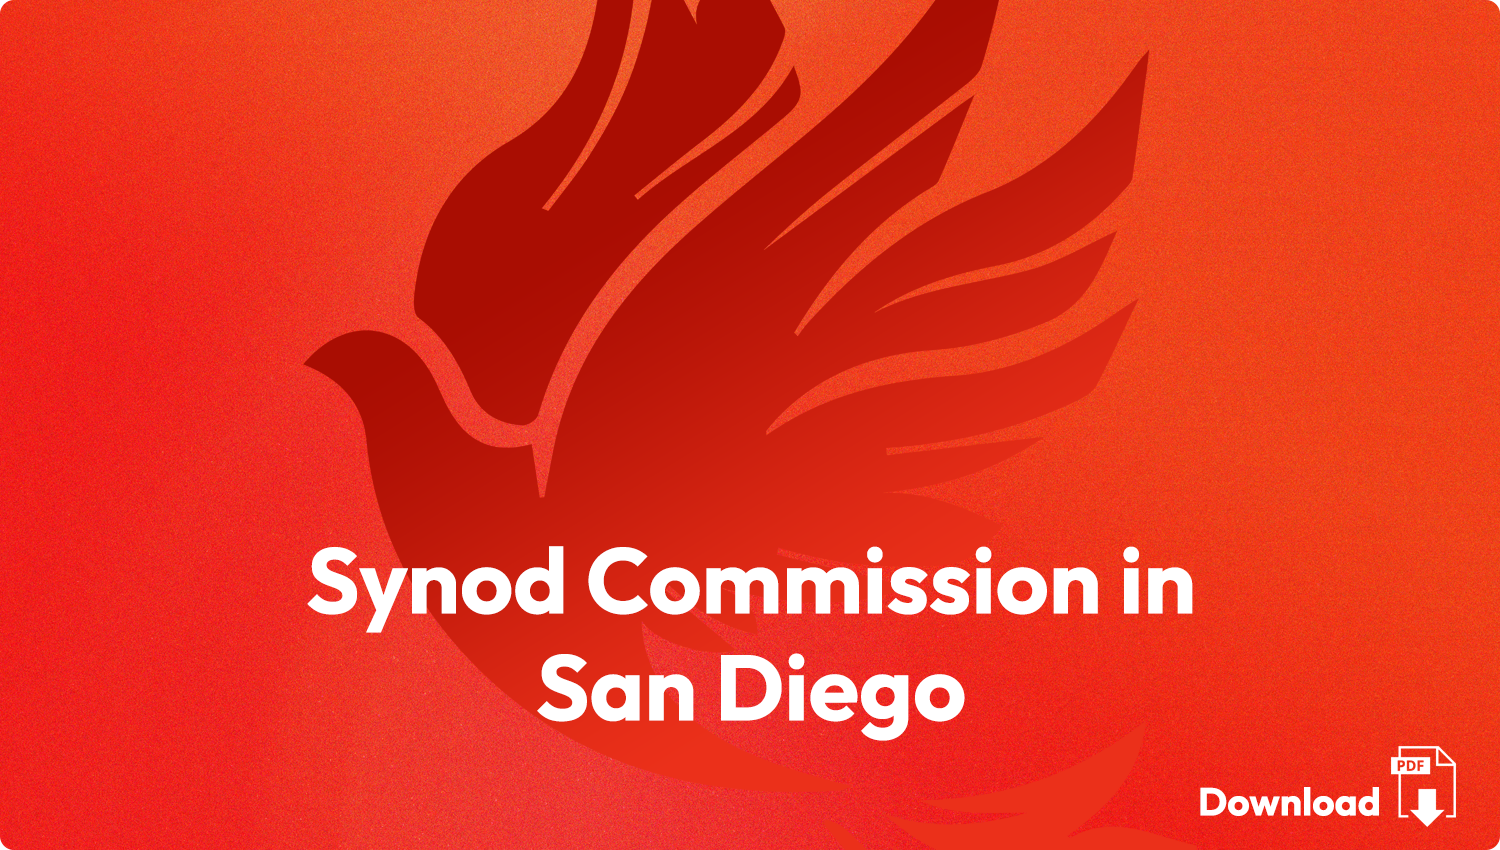 Click here to view the Synod Commision in San Diego